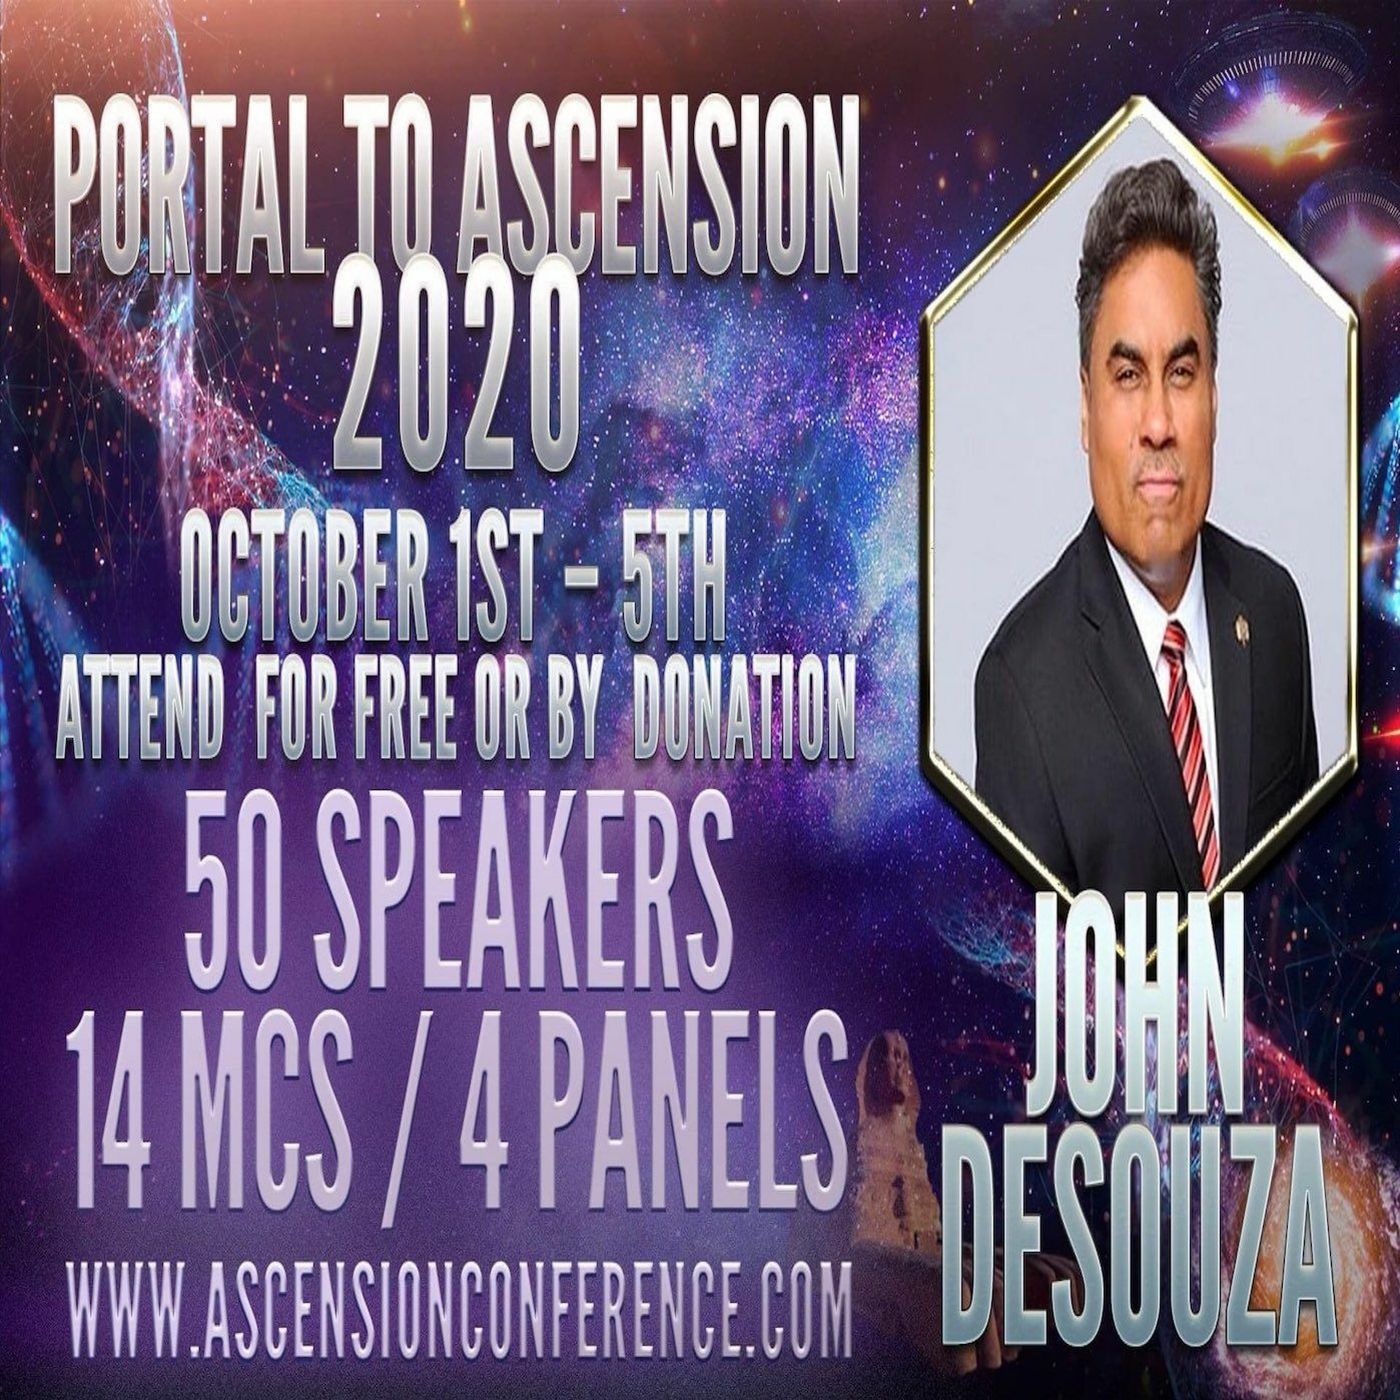 Portal To Ascension 2020 w/ John Desouza & Journey To Truth - Tools For Ascension